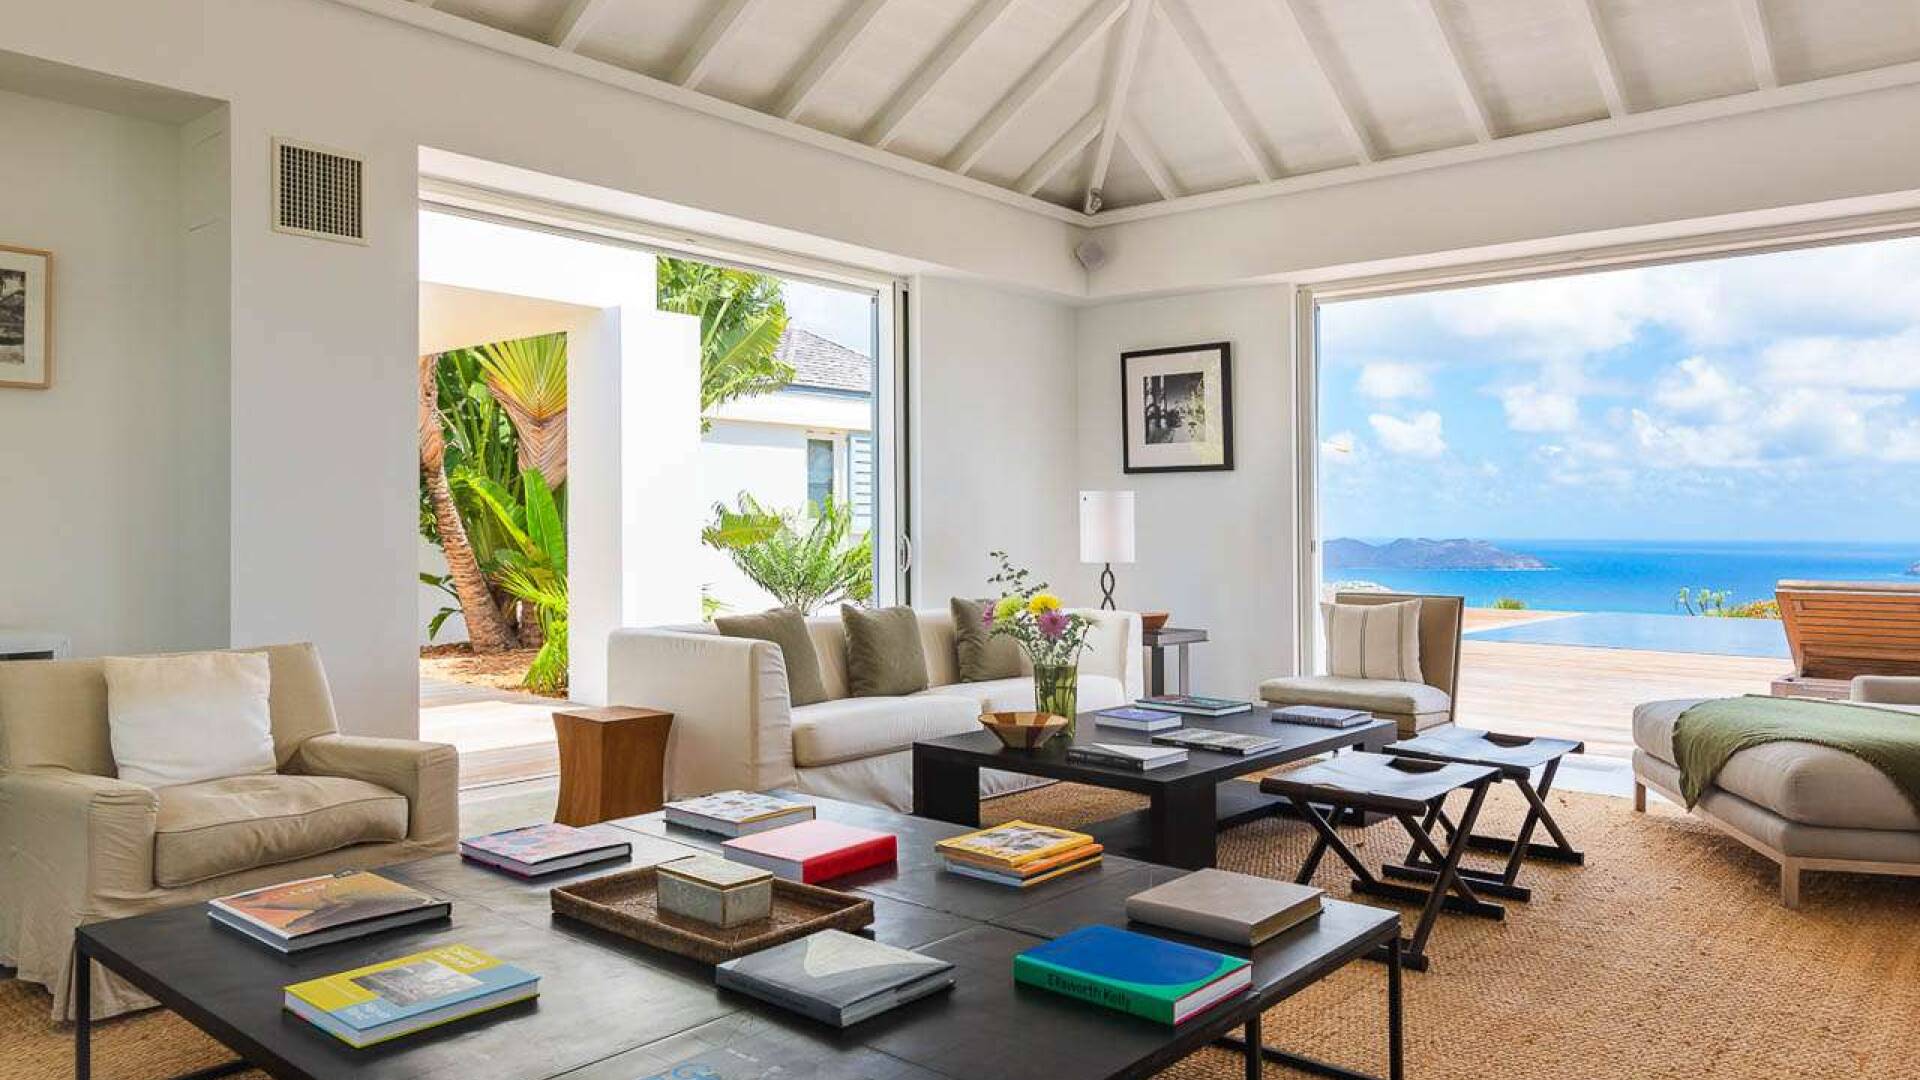 Living Room at WV ECO, Gouverneur, St. Barthelemy